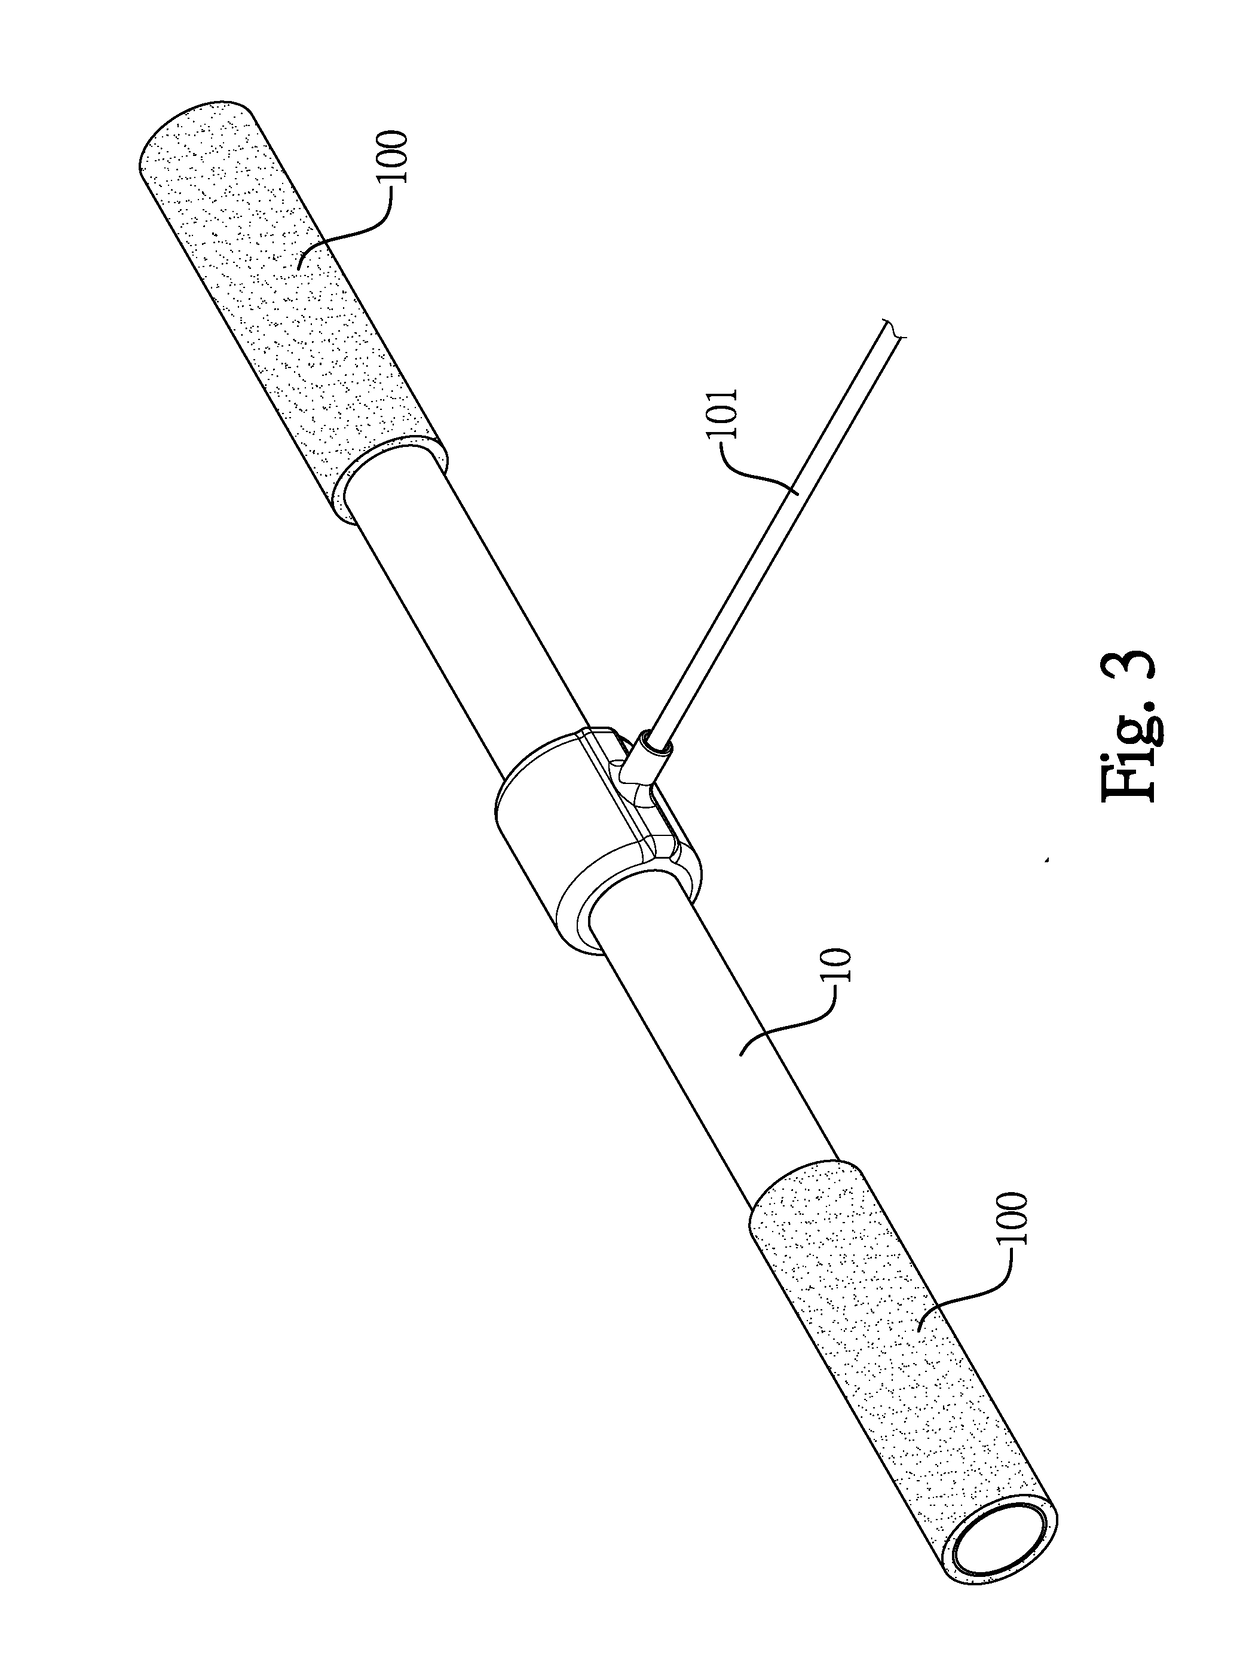 Force measurement system for exercise equipment